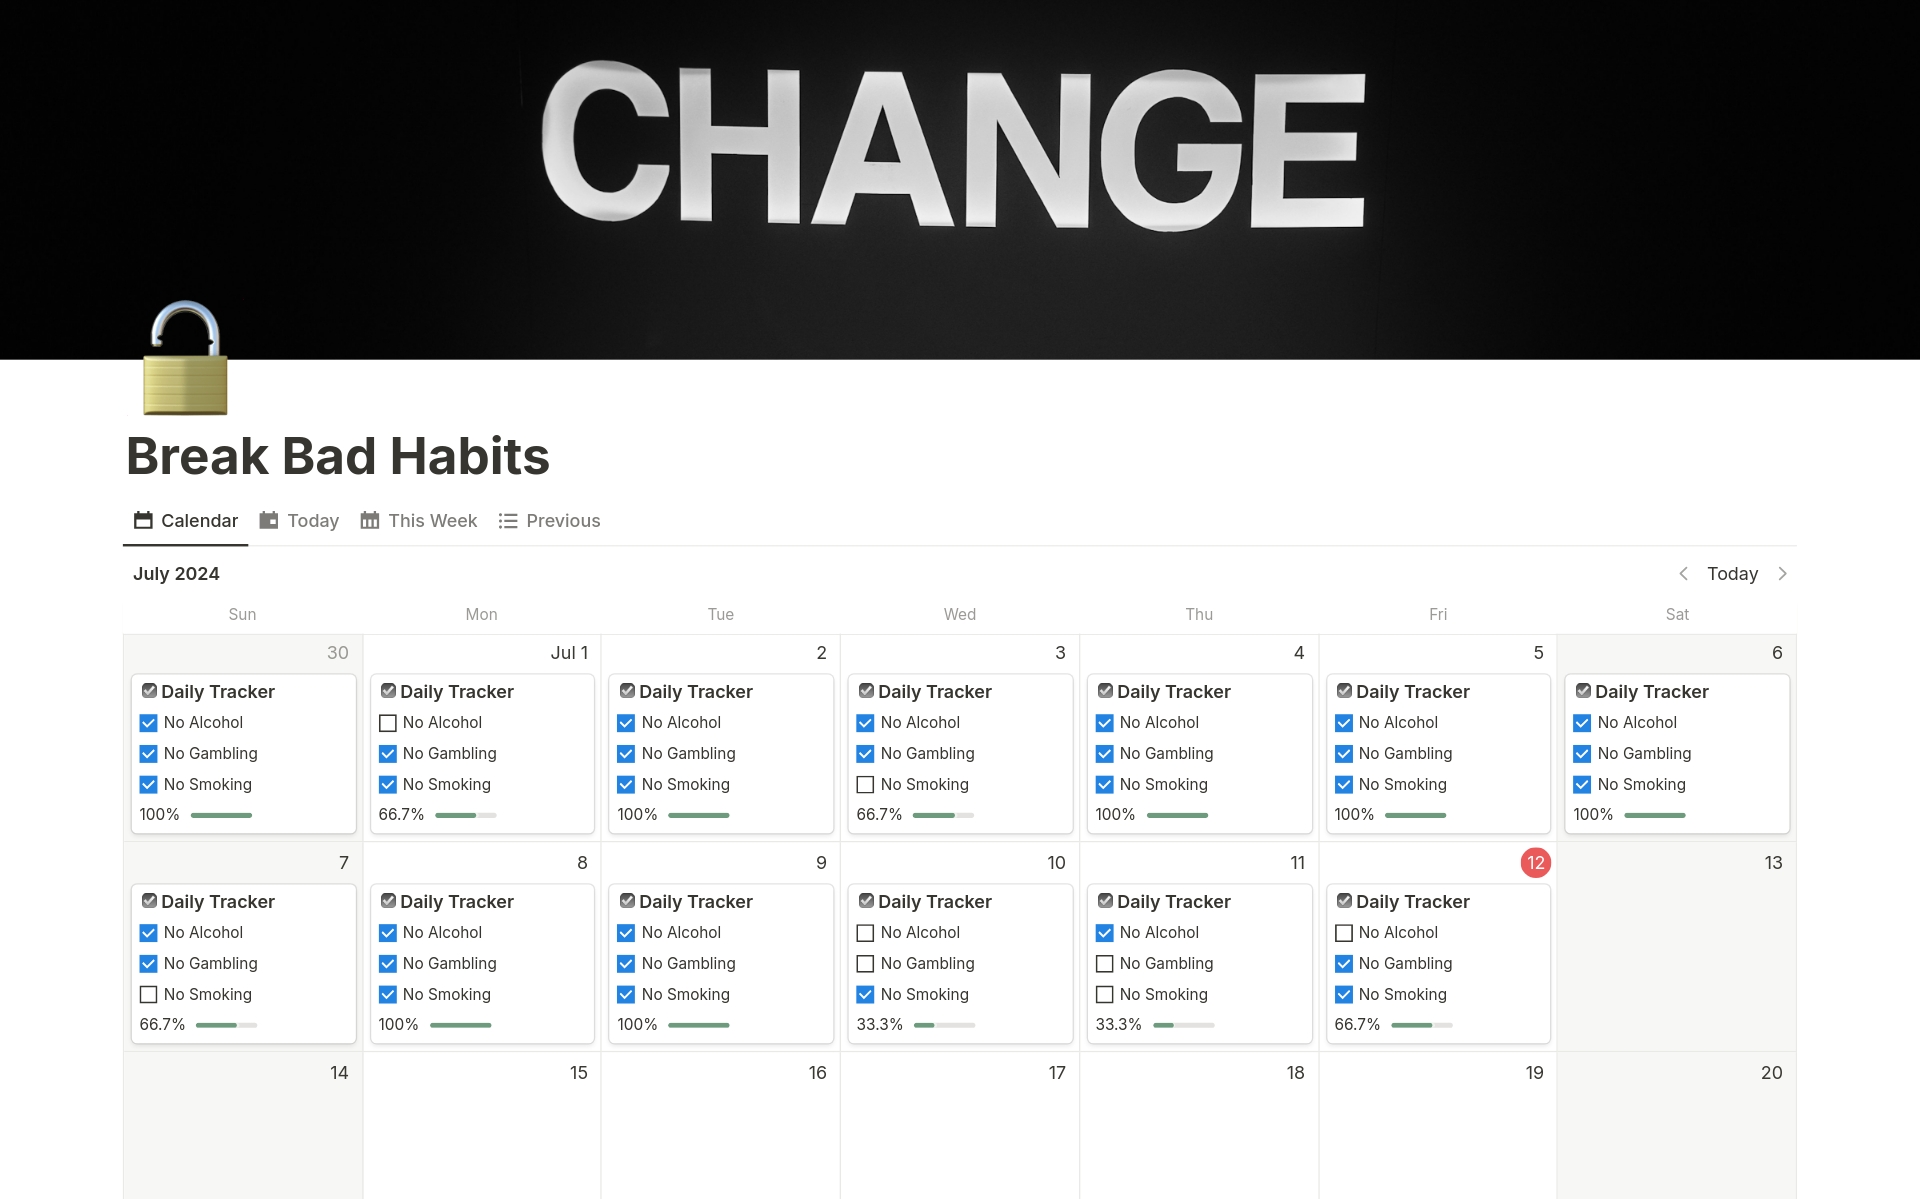 Take control and break free from bad habits with our Reversed Habit Tracker.
- Easily track your progress with a clear calendar.
- Stay focused with dedicated sections for today, this week, and previous days.
Leave your bad habits behind and start your transformation today.